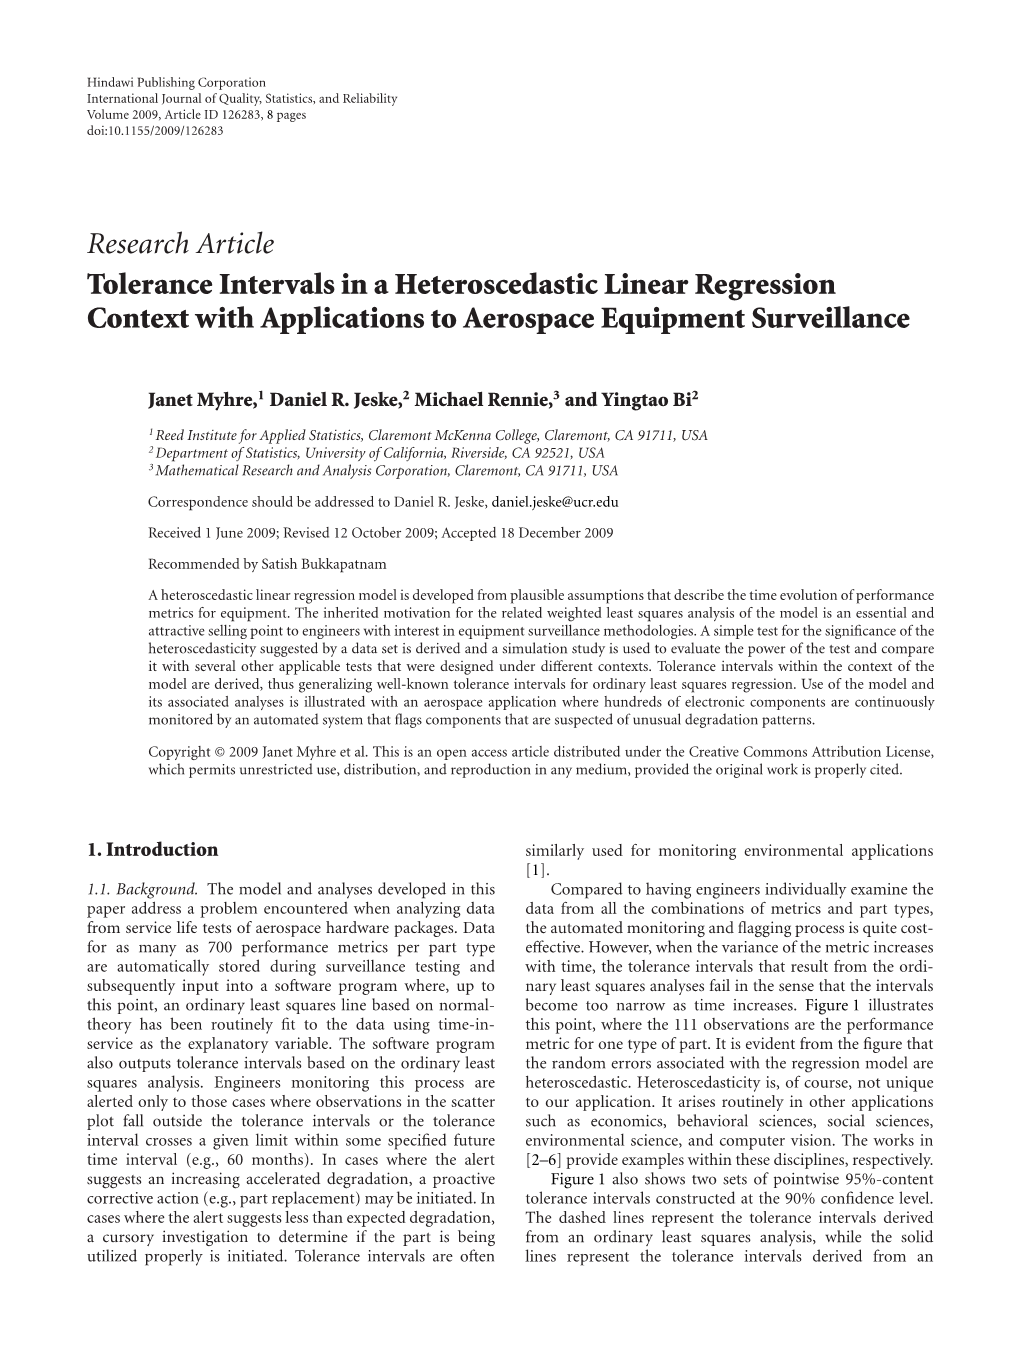 Tolerance Intervals in a Heteroscedastic Linear Regression Context with Applications to Aerospace Equipment Surveillance